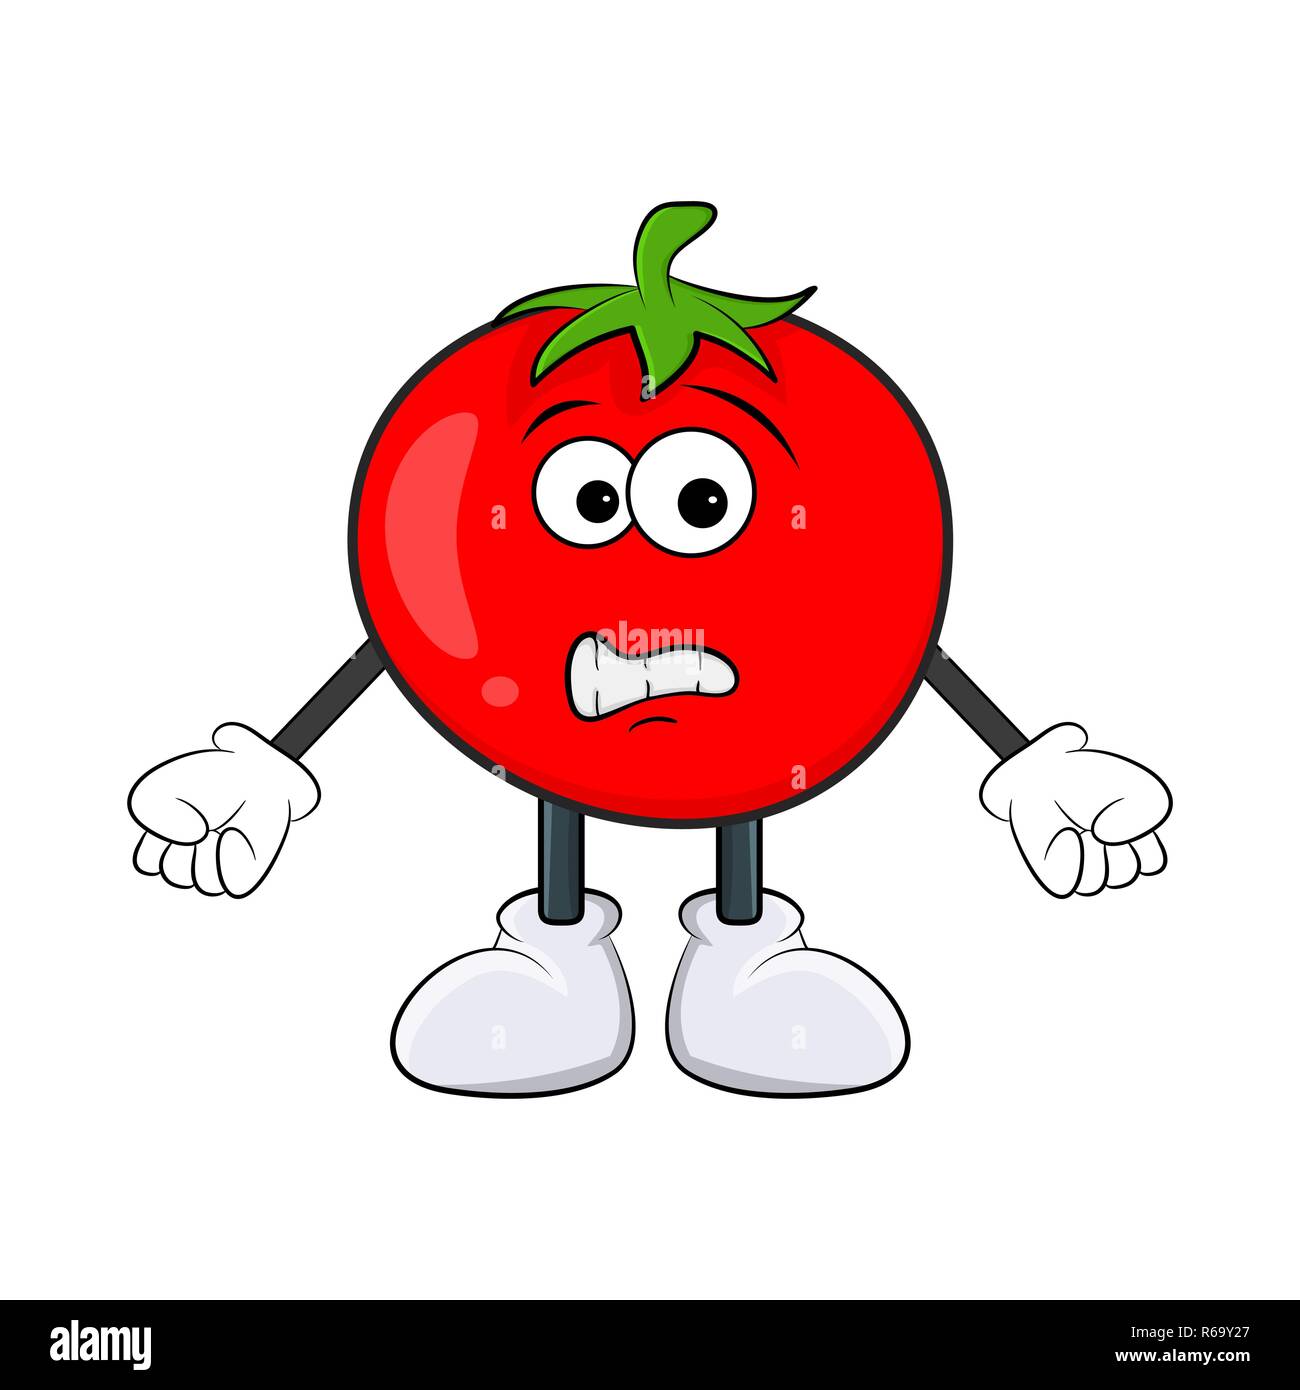 Funny tomato character cartoon design isolated on white background Stock Vector